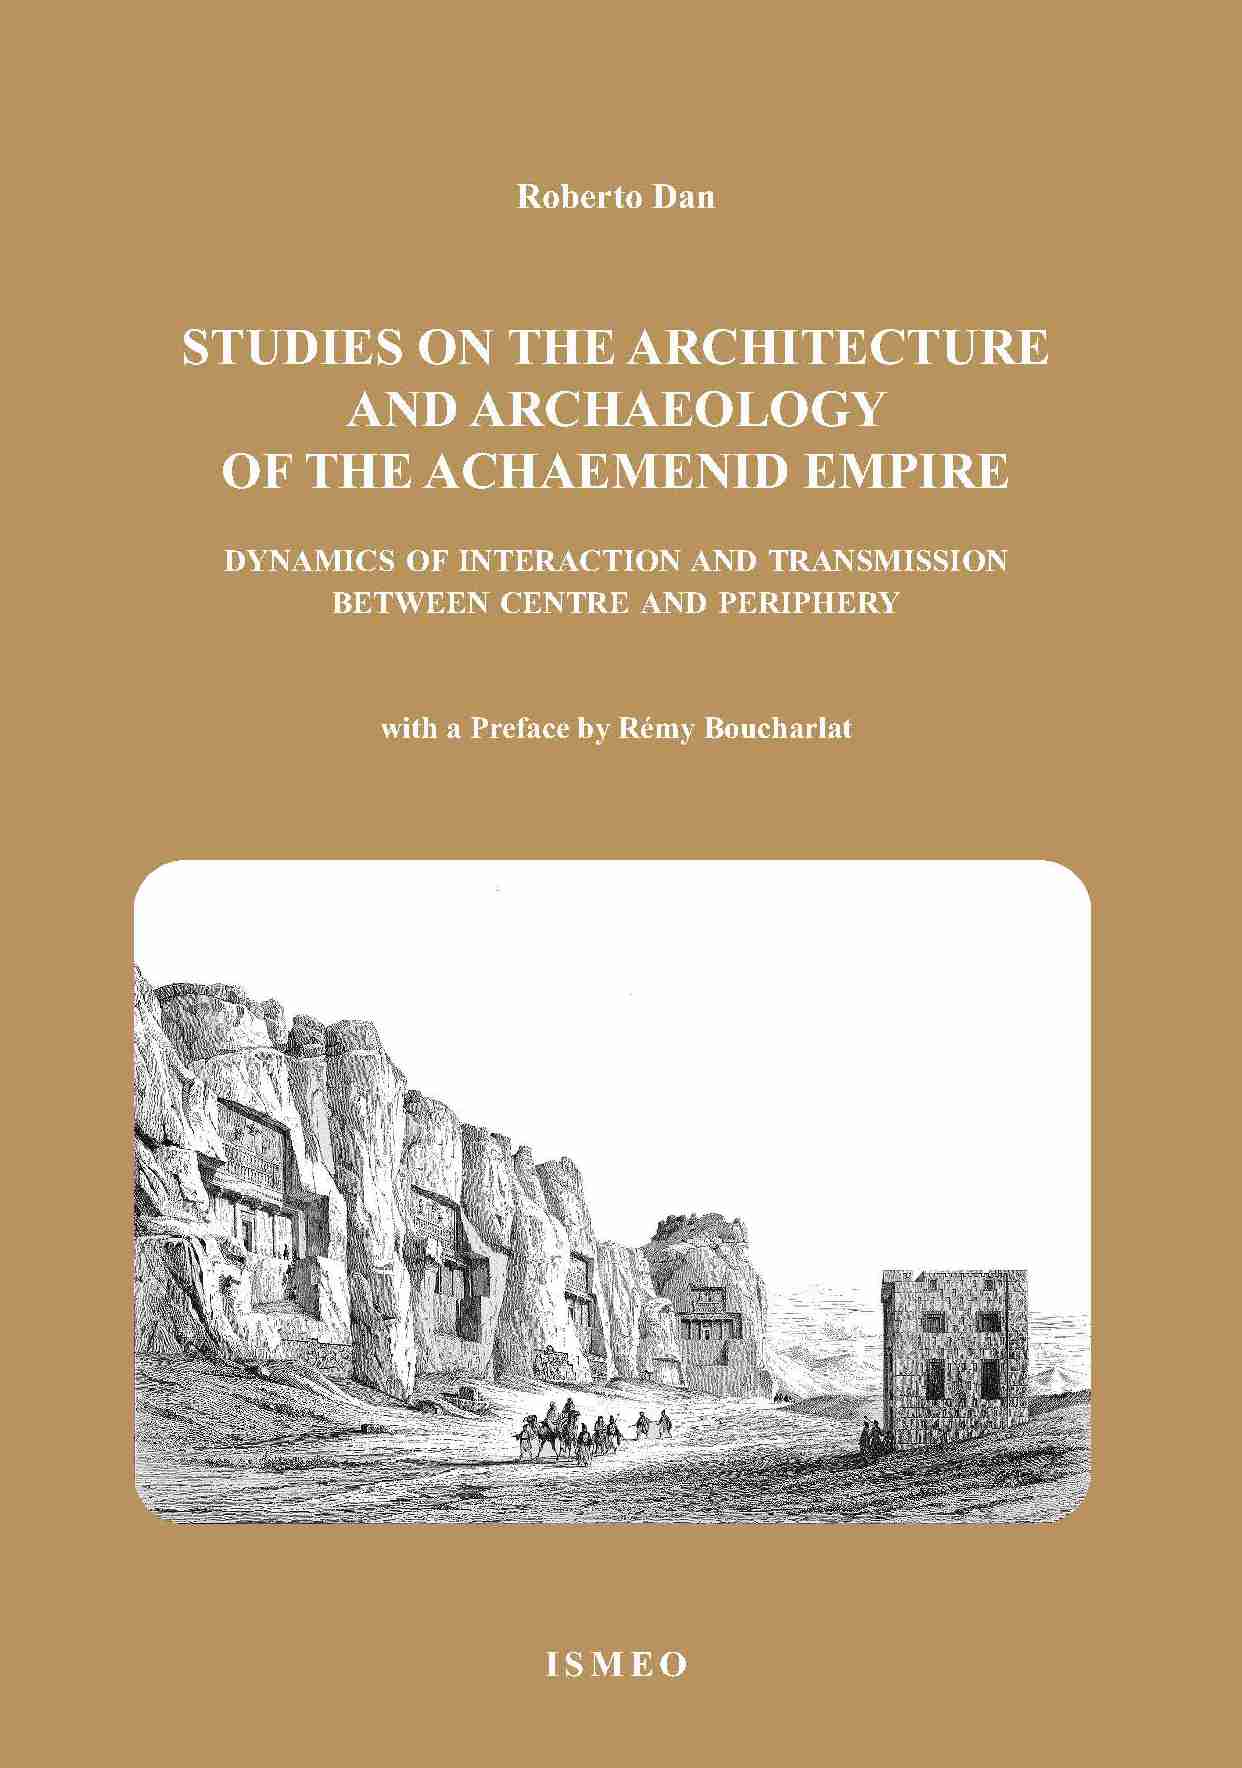 STUDIES ON THE ARCHITECTURE AND ARCHAEOLOGY OF THE ACHAEMENID EMPIRE
DYNAMICS OF INTERACTION AND TRANSMISSION
BETWEEN CENTRE AND PERIPHERY -  SERIE ORIENTALE ROMA n.s. 35 